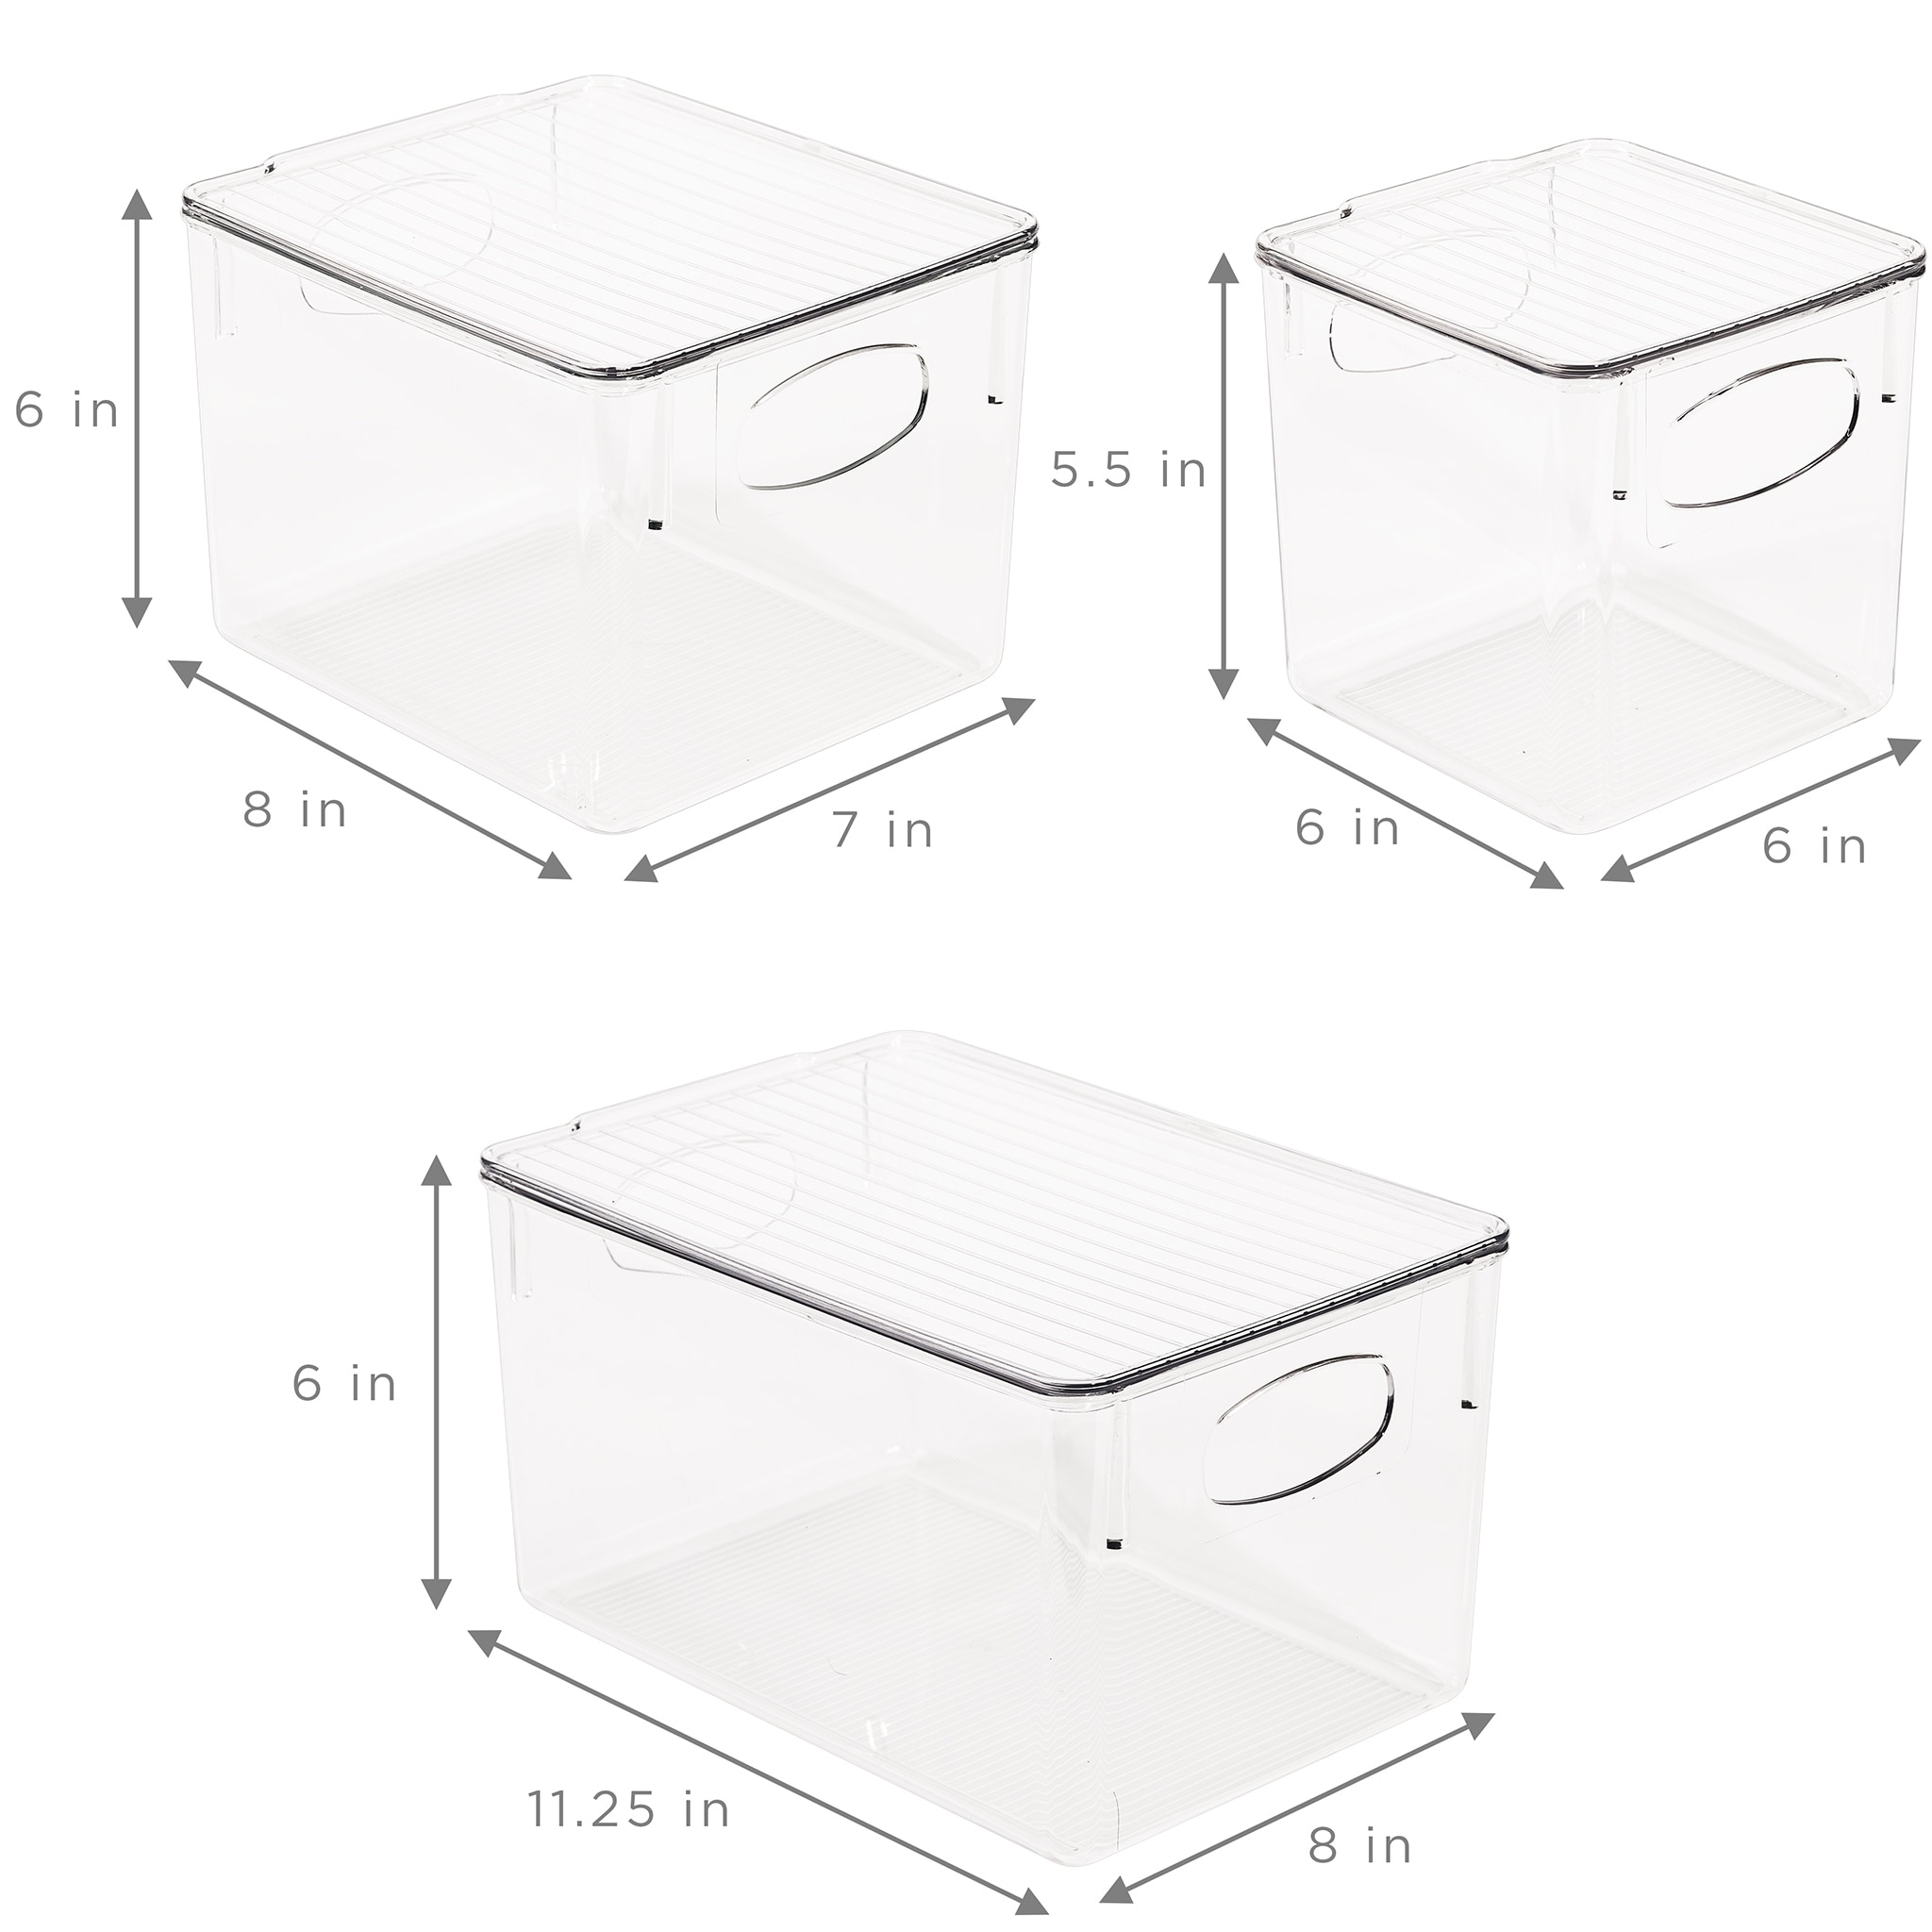 https://ak1.ostkcdn.com/images/products/is/images/direct/47f2eaed60f8158cc29a52ccf2b0a44045d76e7b/Organizer-Container-Bins%2C-Clear-Plastic-Bathroom-Storage-%286-pack%29.jpg